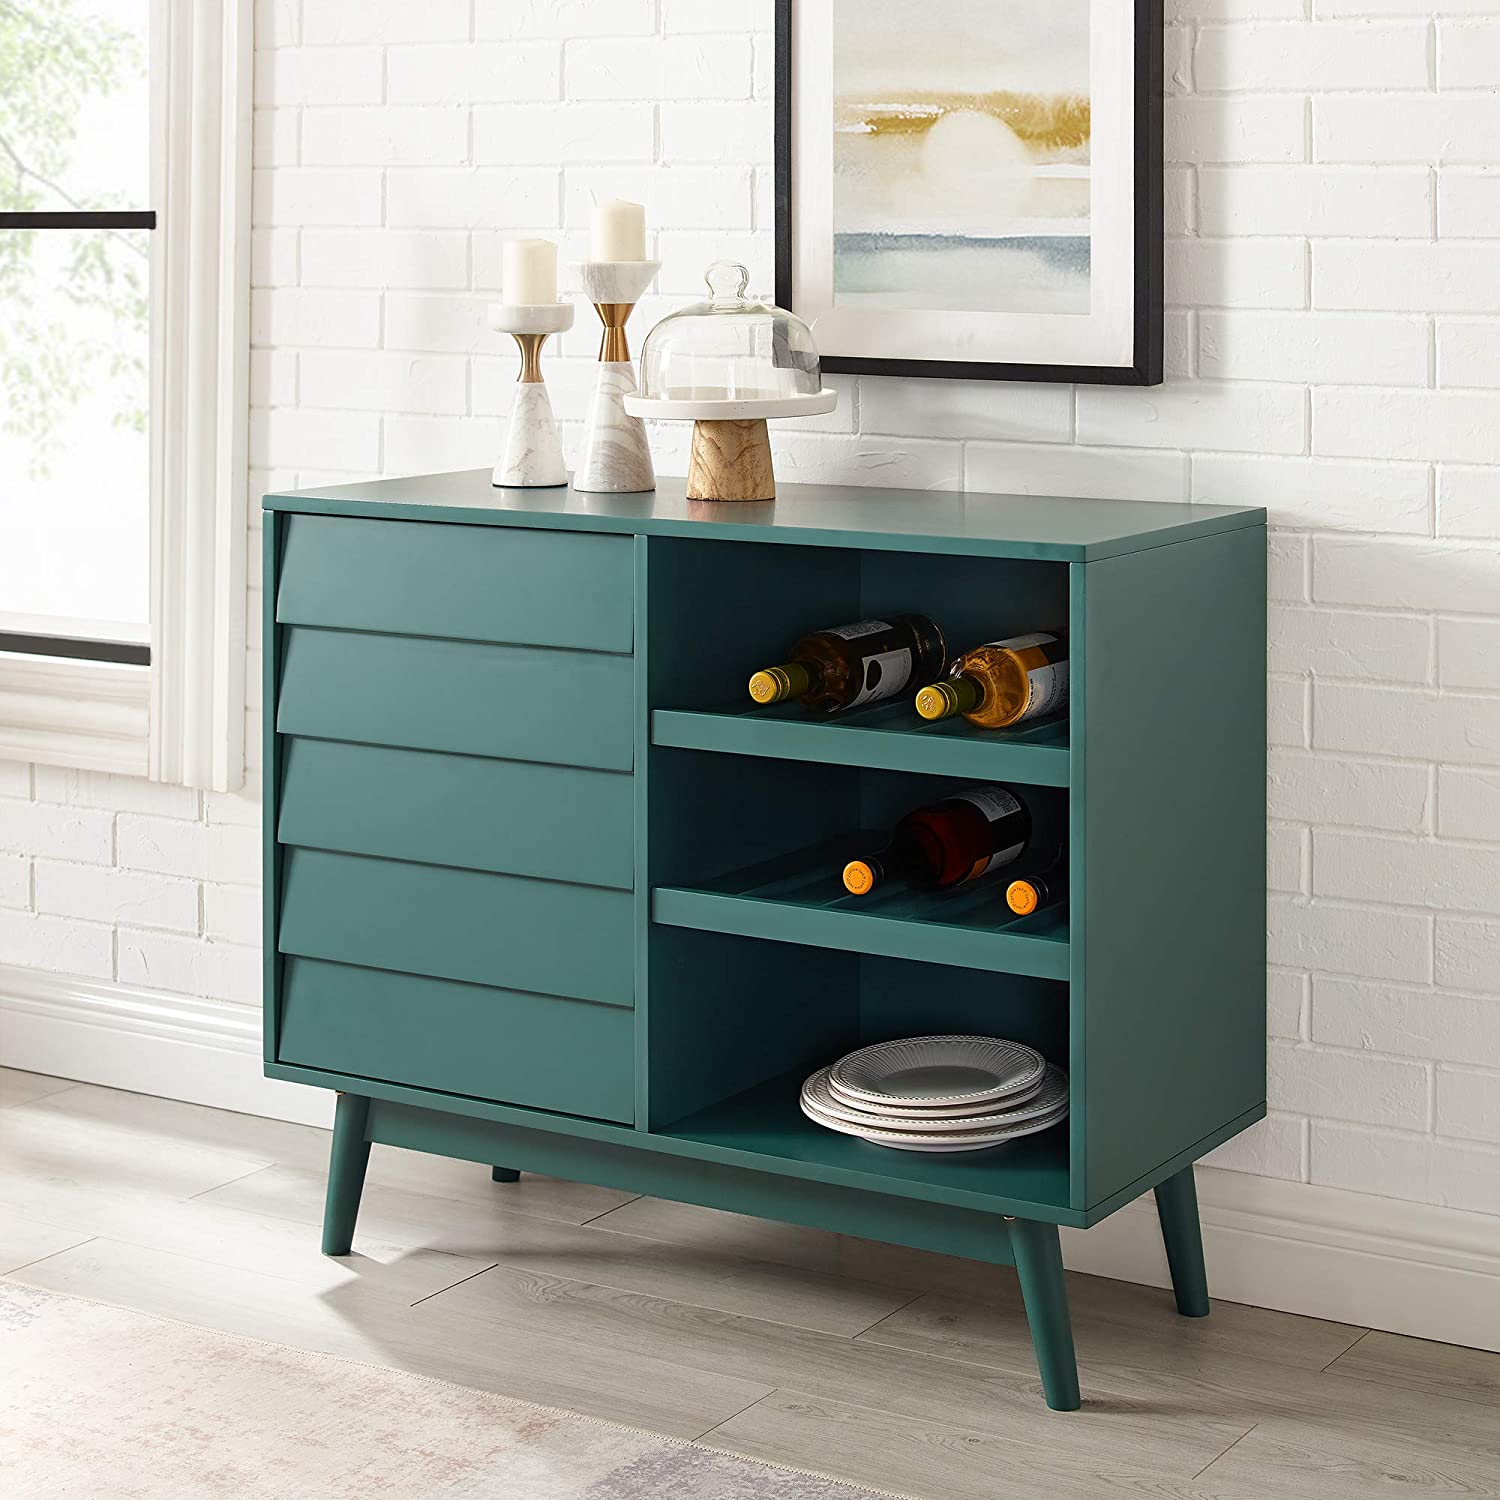 Mid-Century Modern Wood Kitchen Buffet Sideboard with Bottle Storage-Entryway Serving Wine Storage Doors-Dining Room Console Table